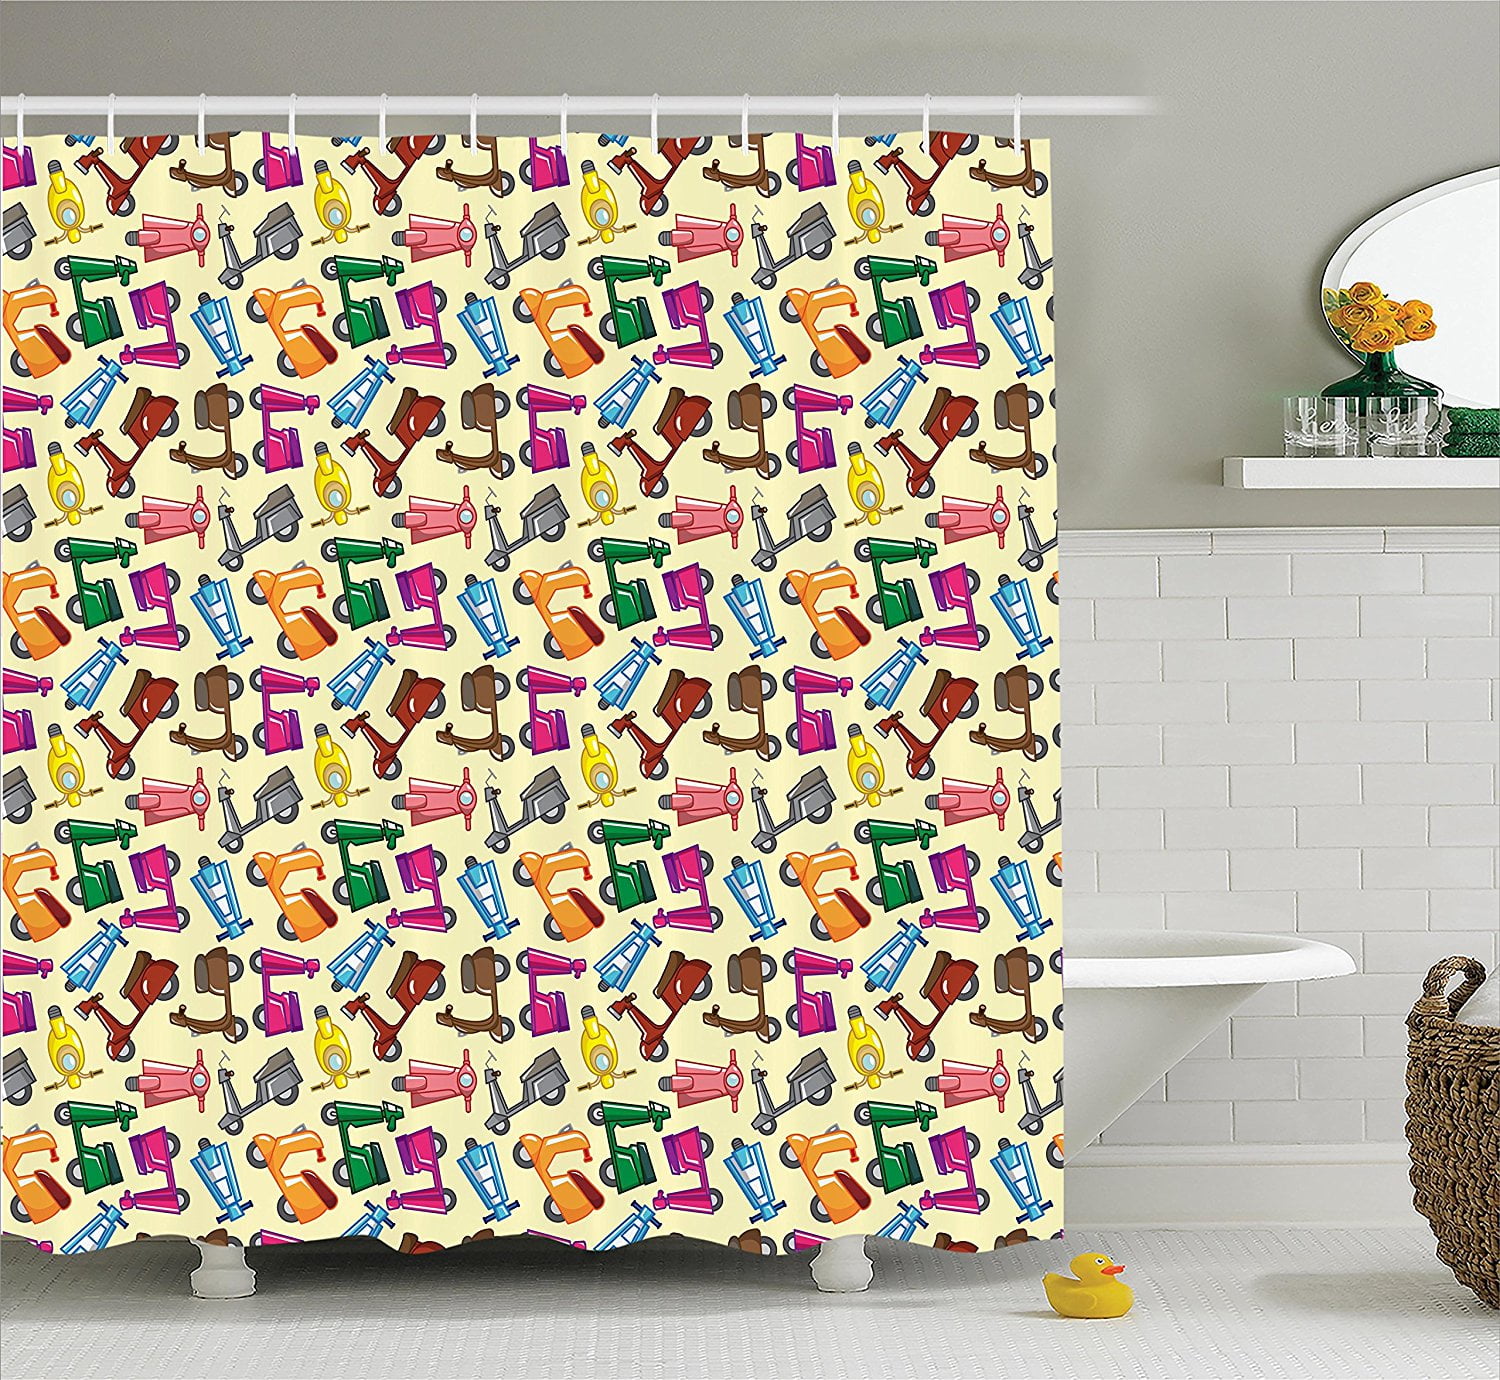 Details about   Abstract Geometric Patterns Small Cube Mosaic Shower Curtain For Bathroom Decor 